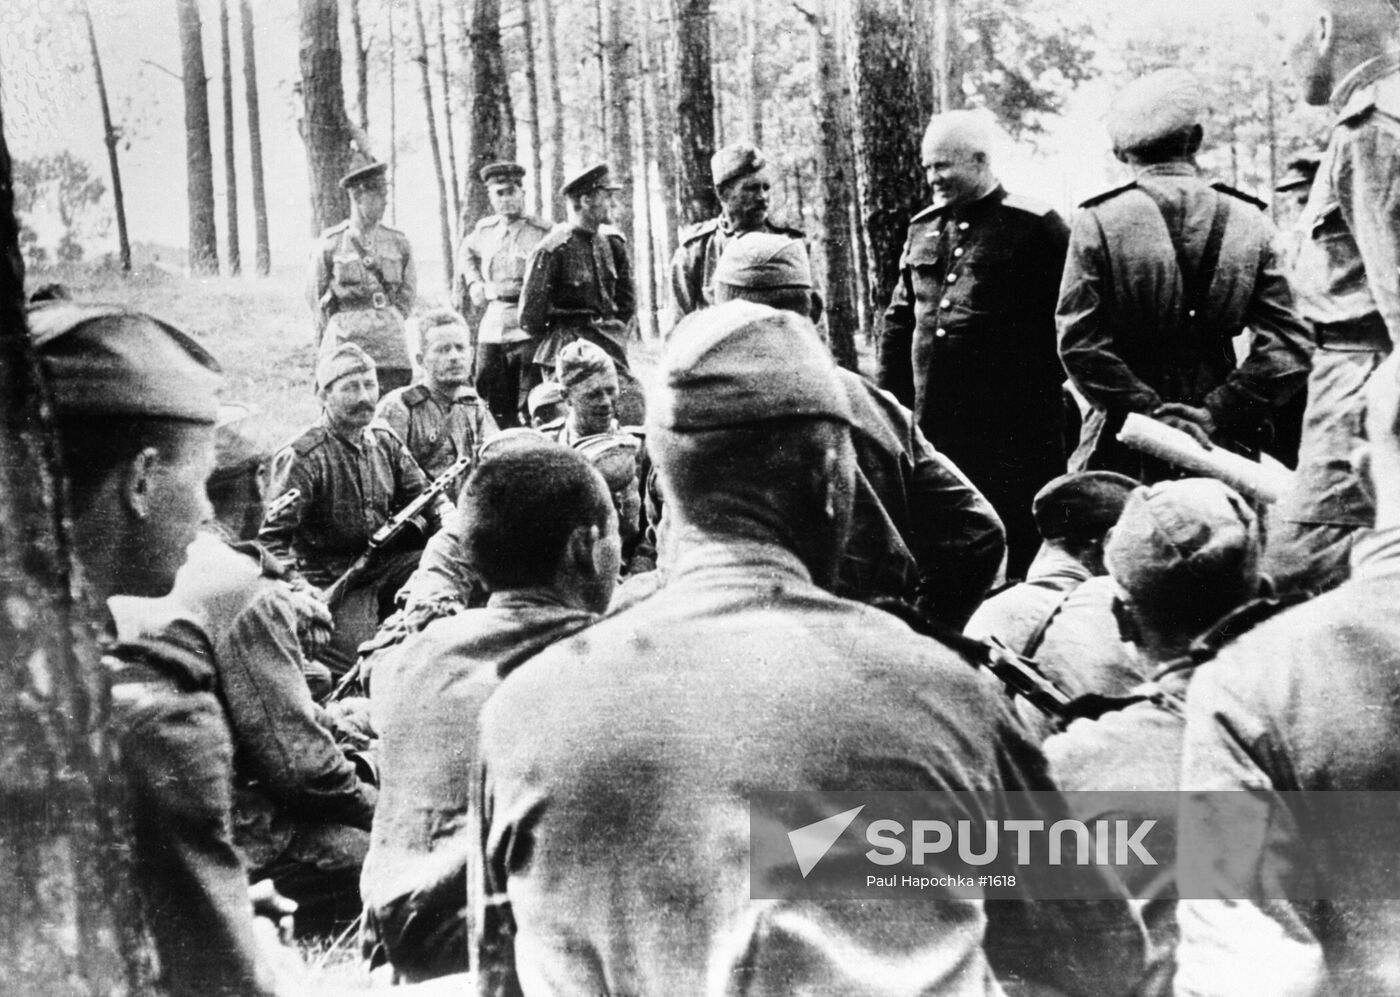 WWII KHRUSHCHEV FIGHTERS MEETING 